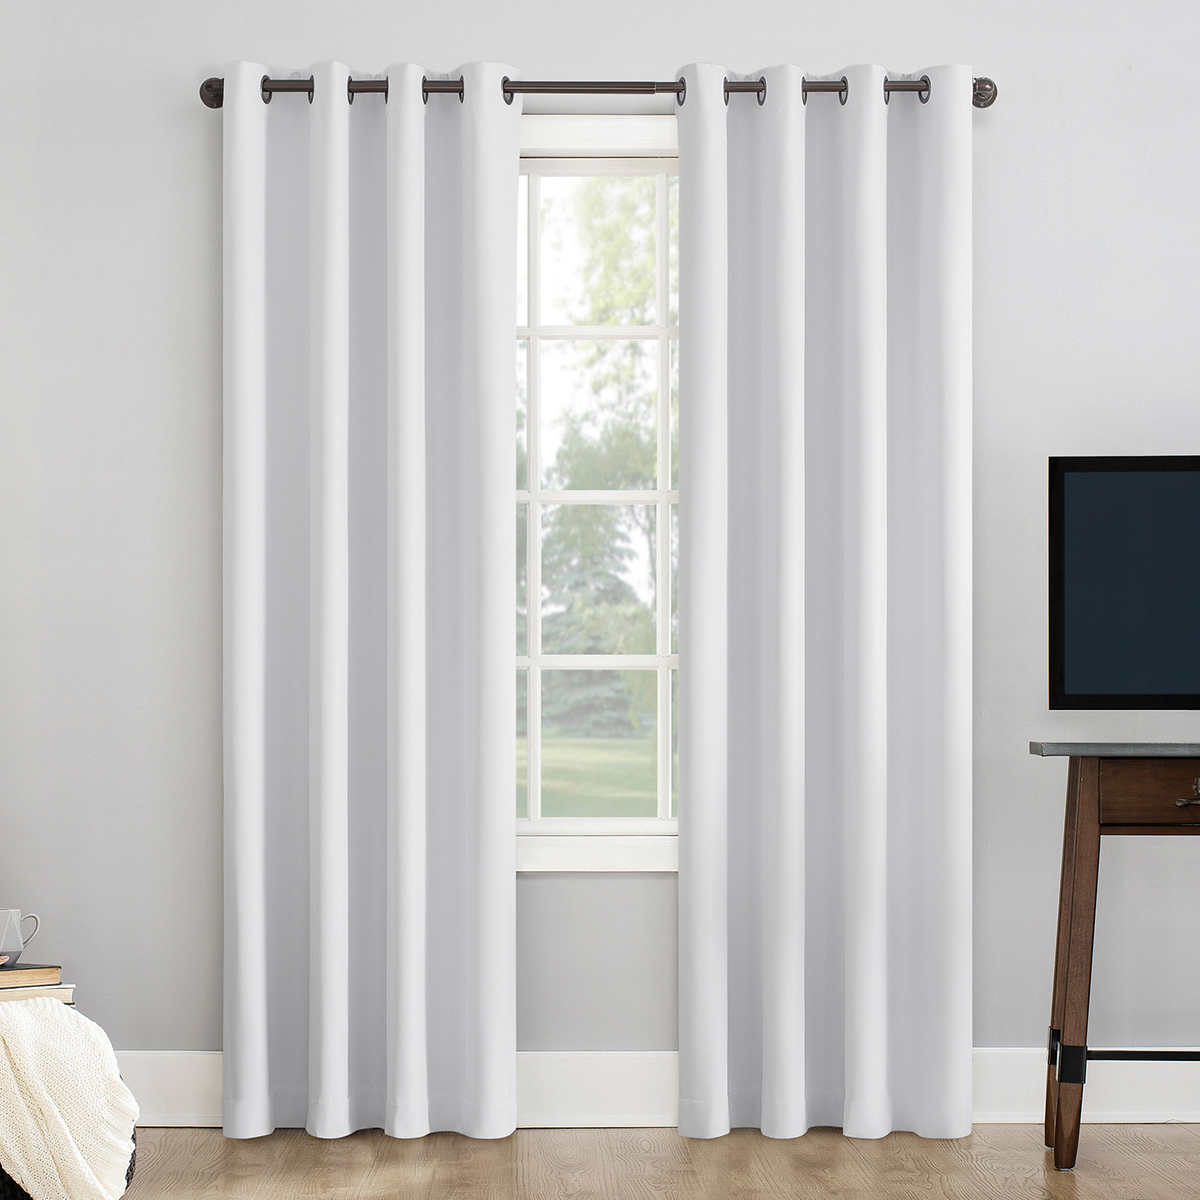 2 Pcs 100% Polyester Blockout Curtains Panel Rod Thermal Insulated Tiers 